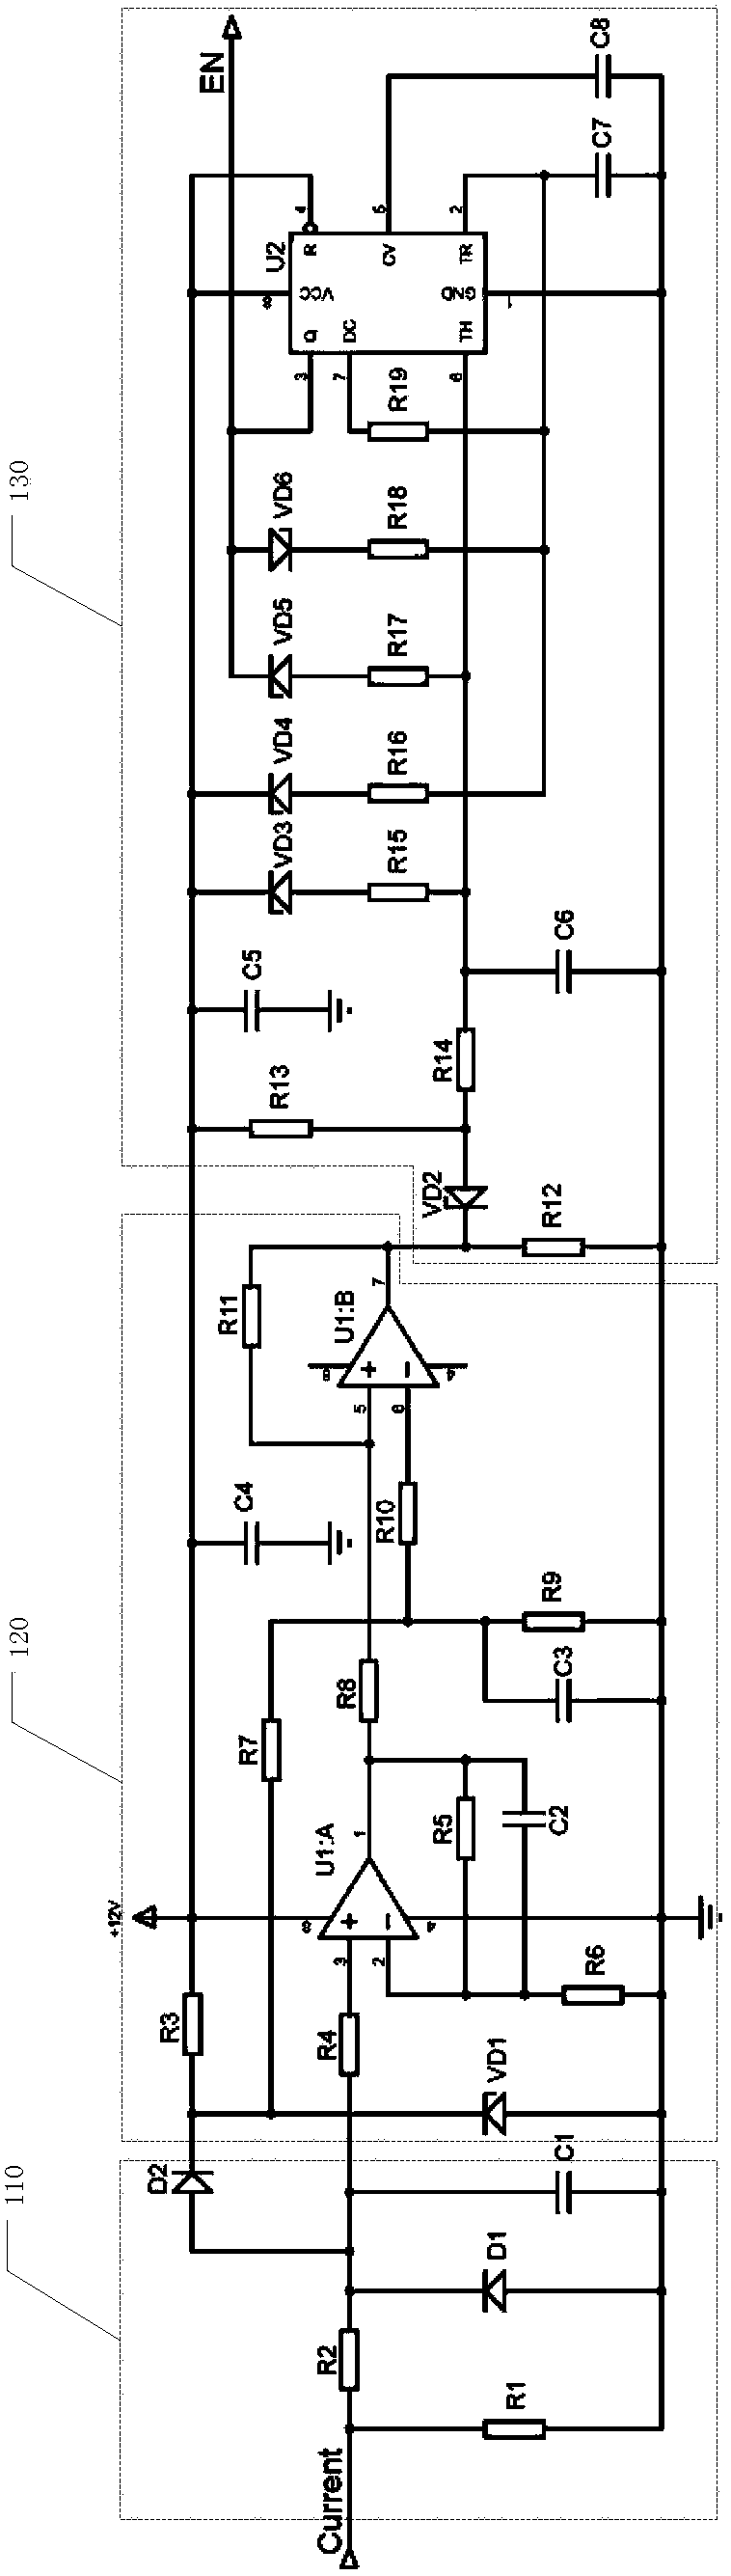 Protection circuit of DC motor